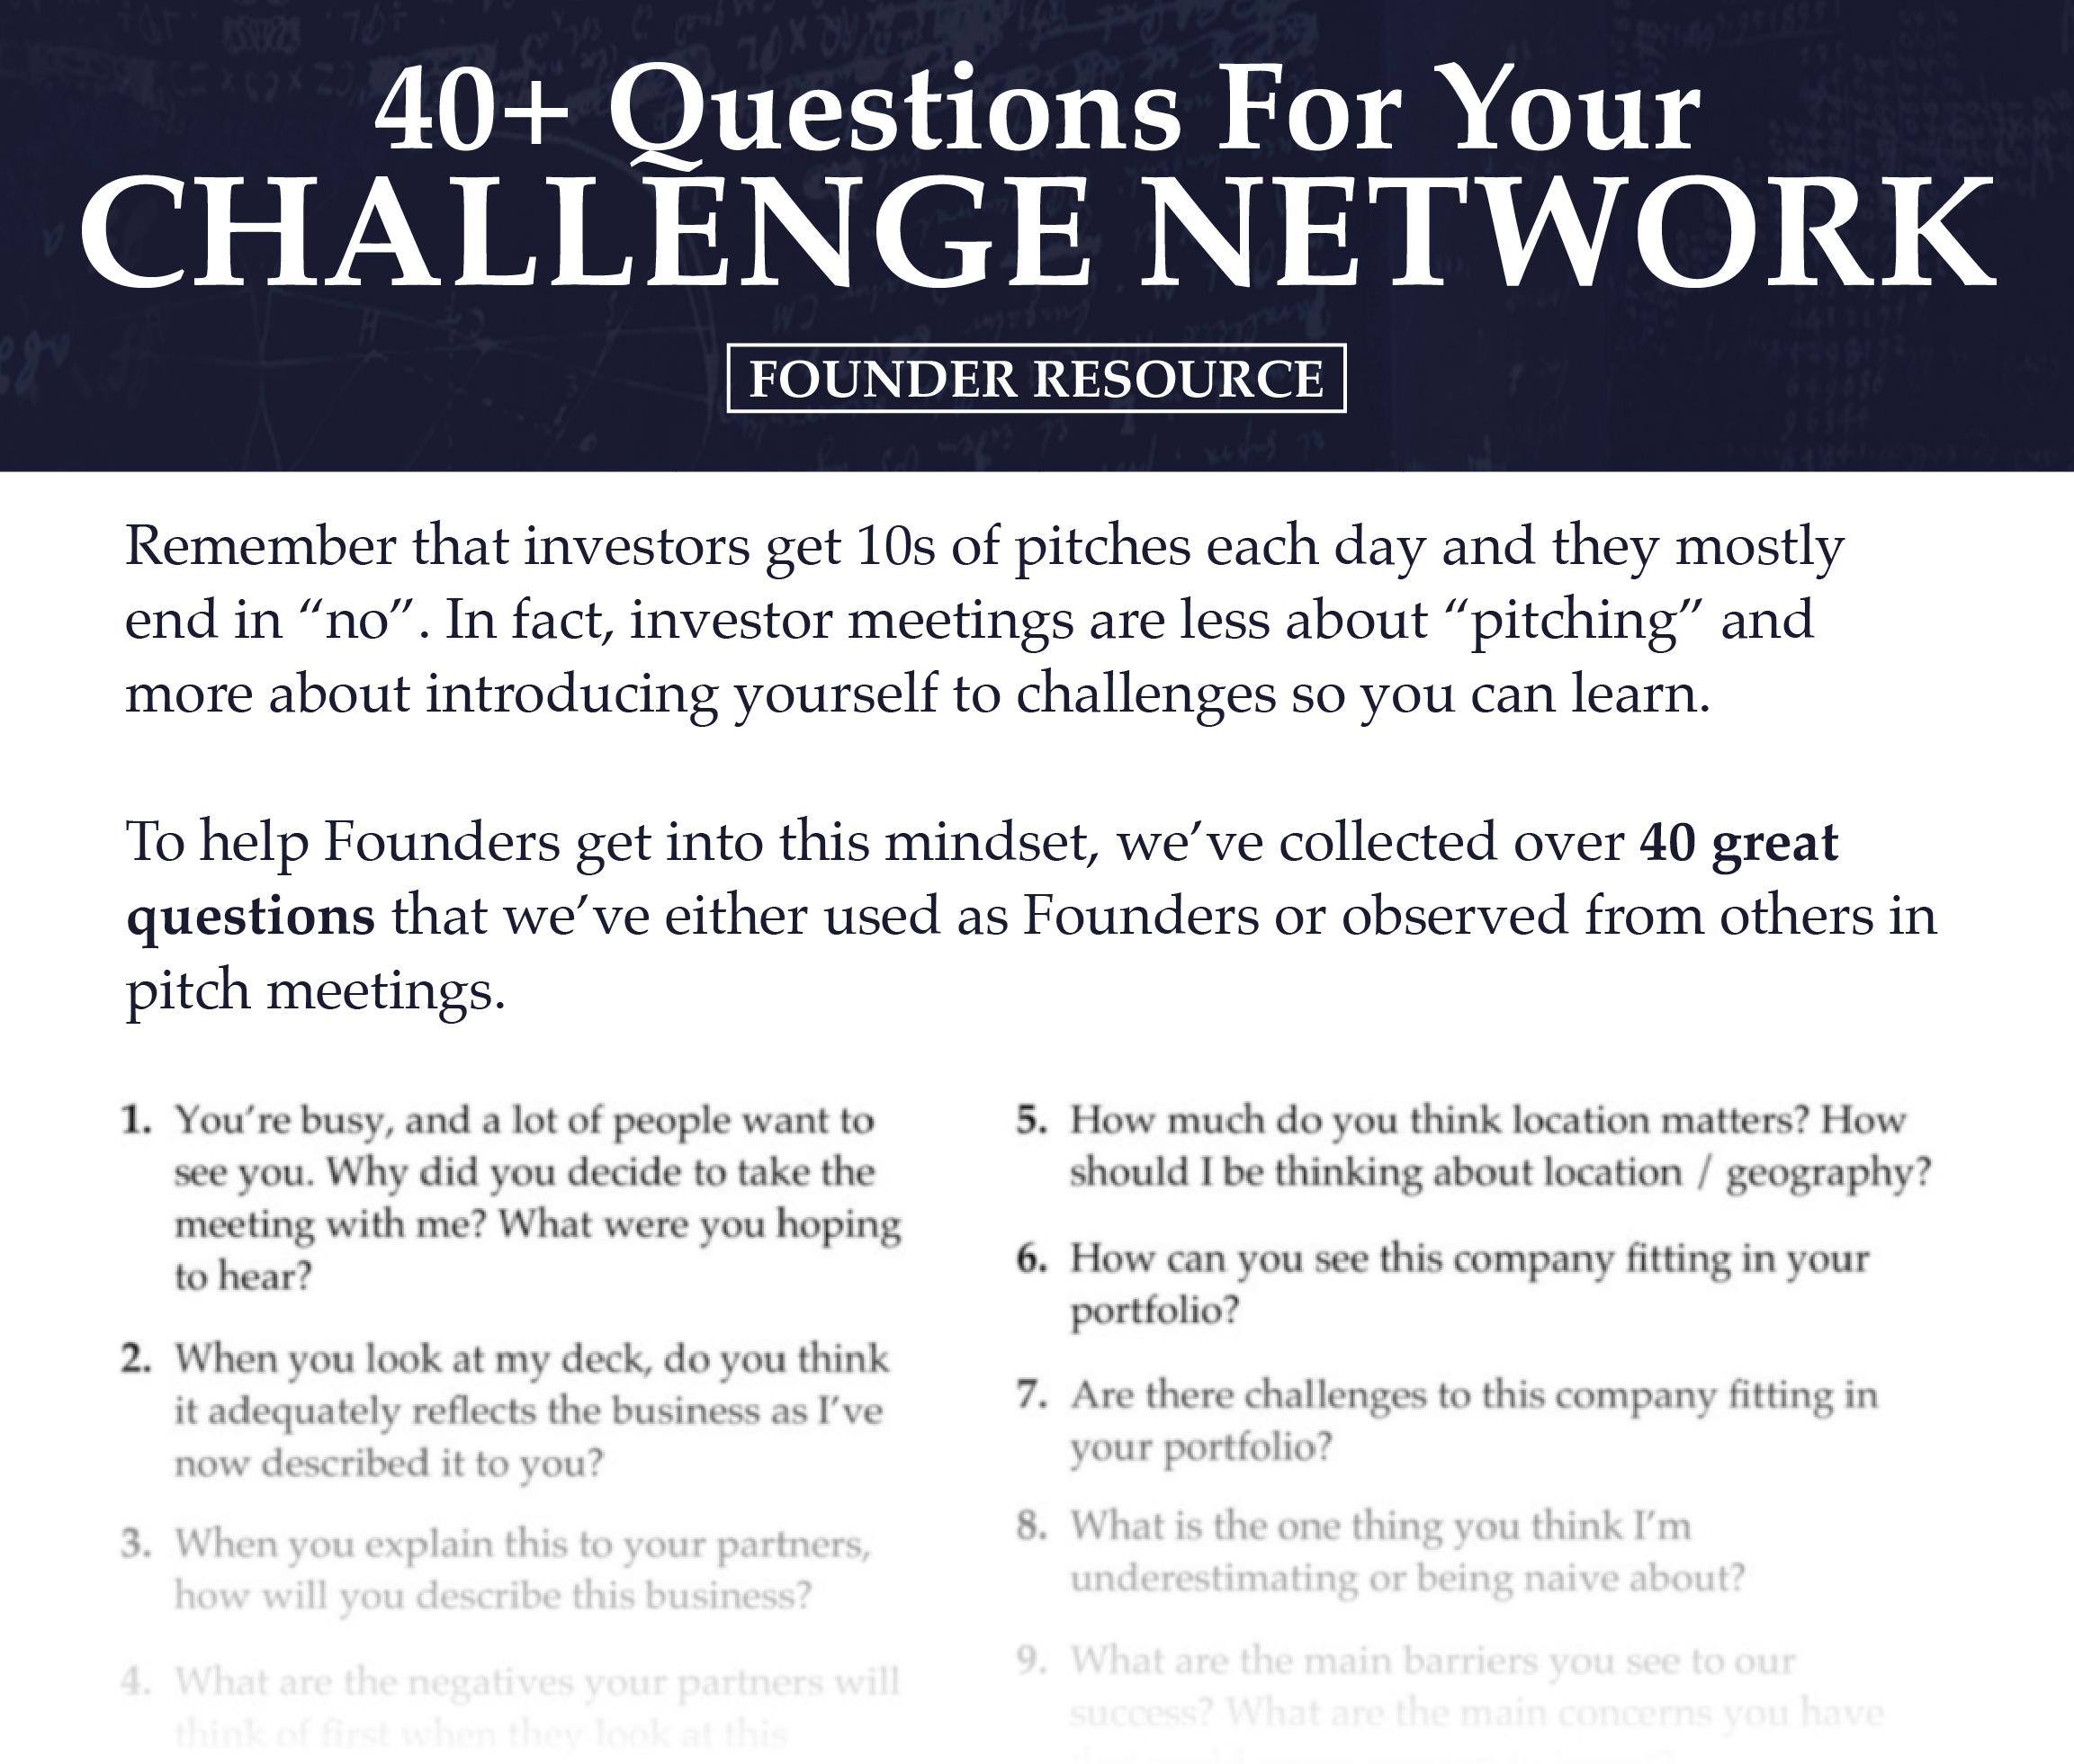 40+ Questions for Your Challenge Network